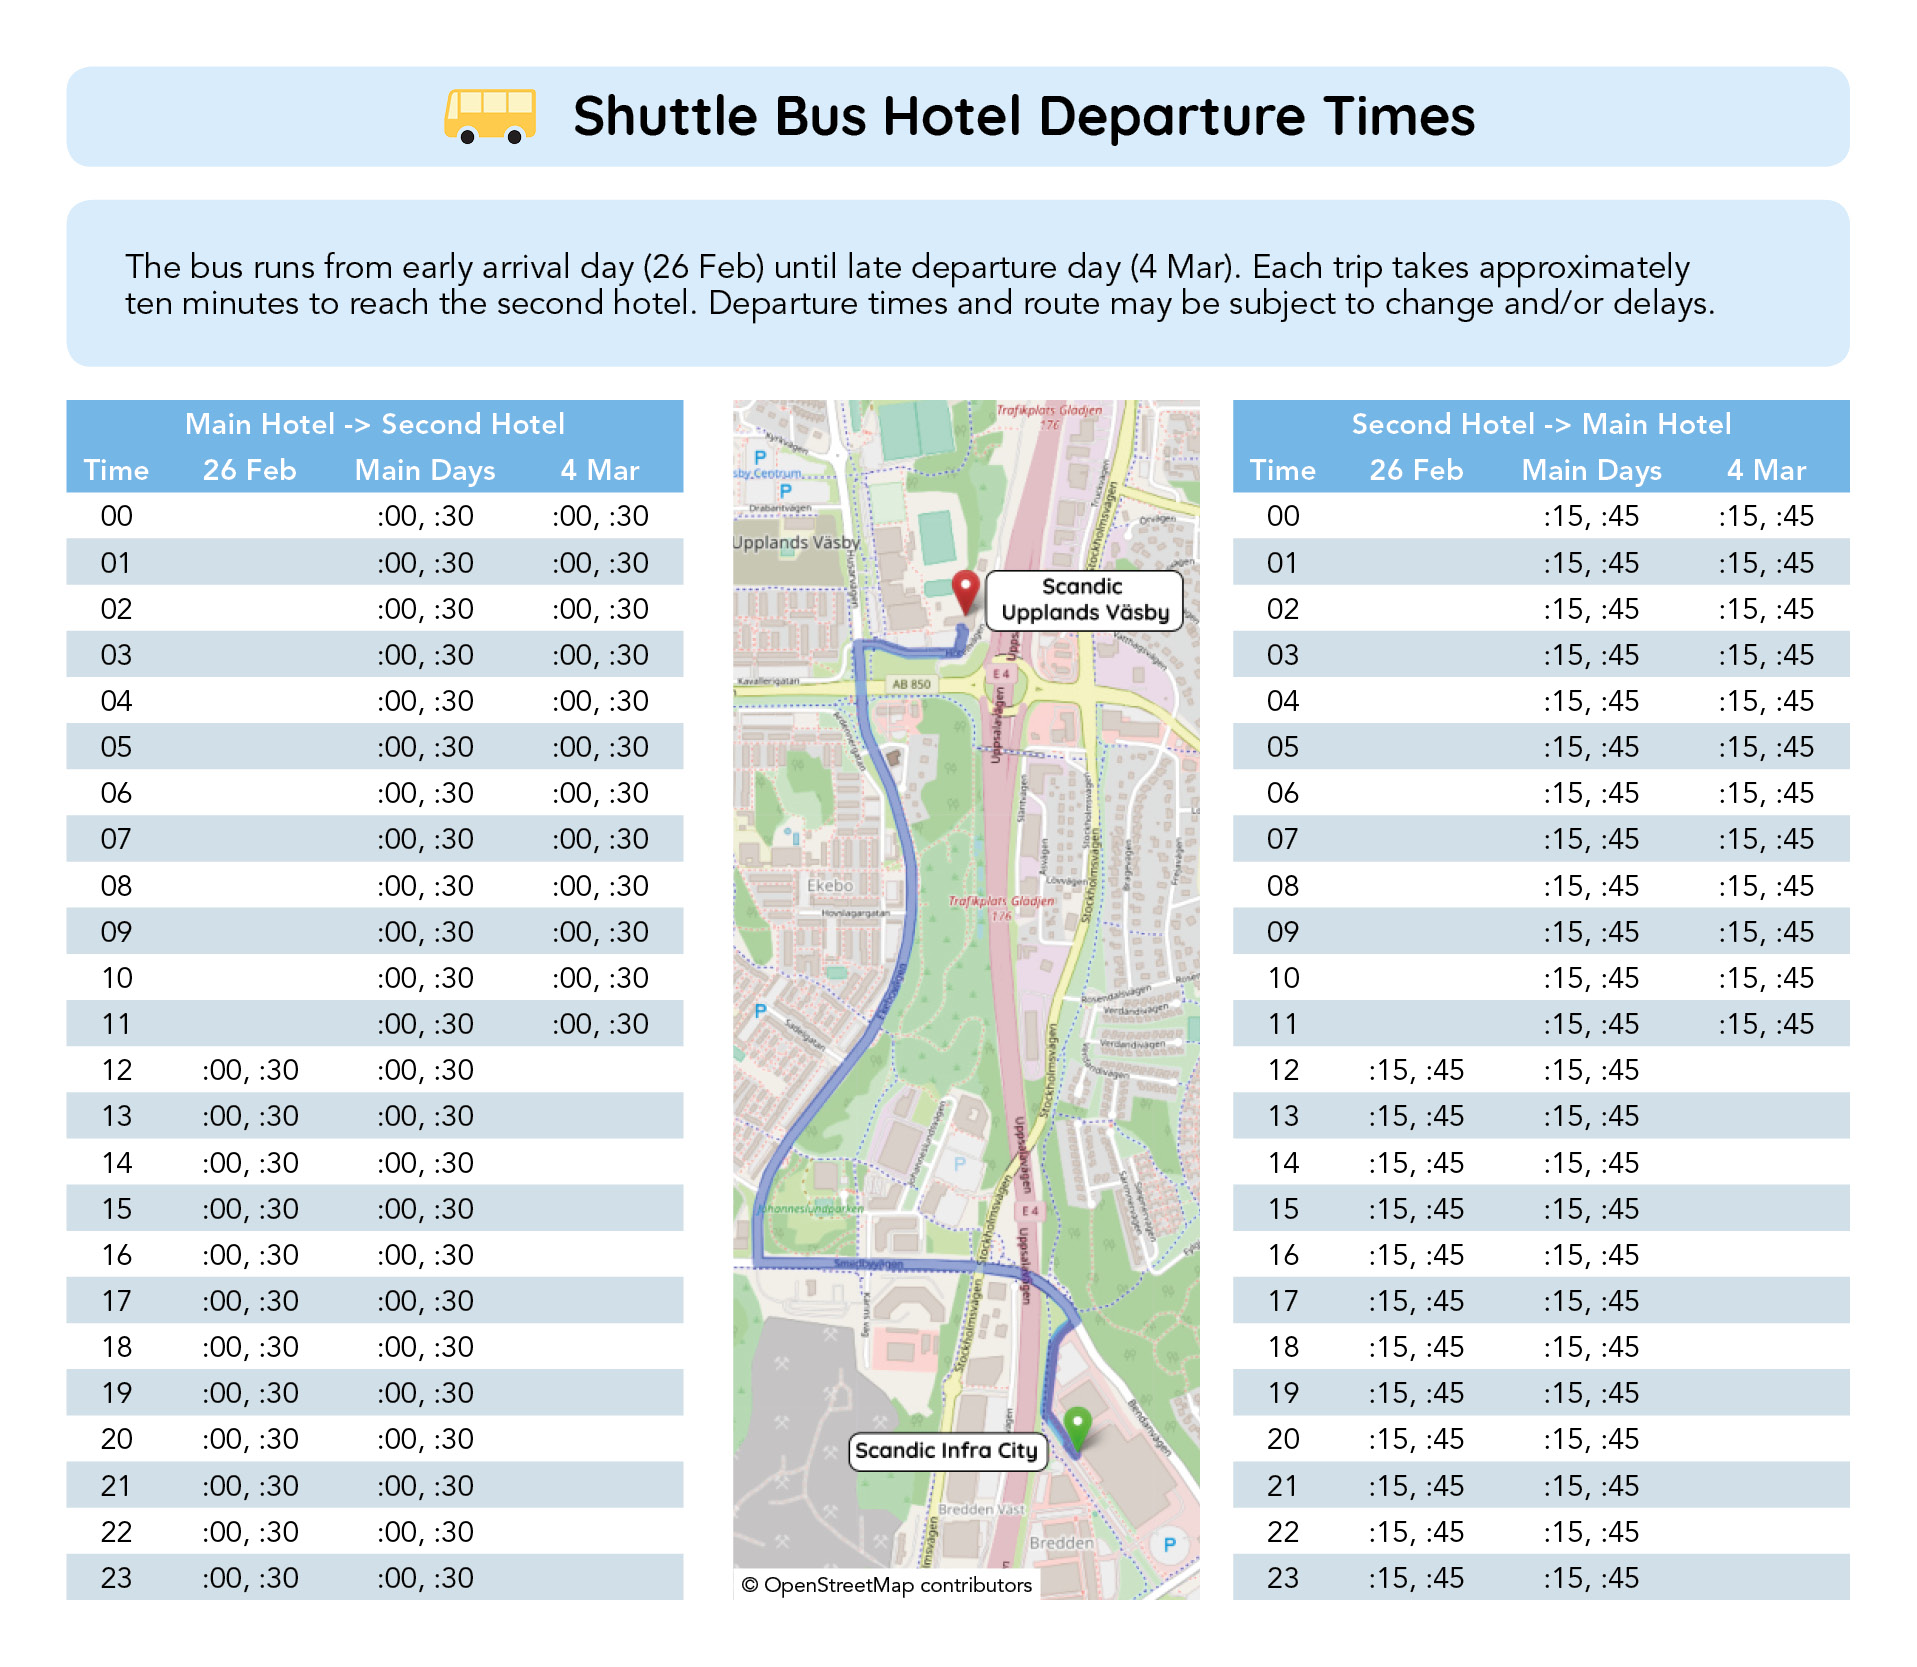 Shuttle bus schedules - click to open in a new page